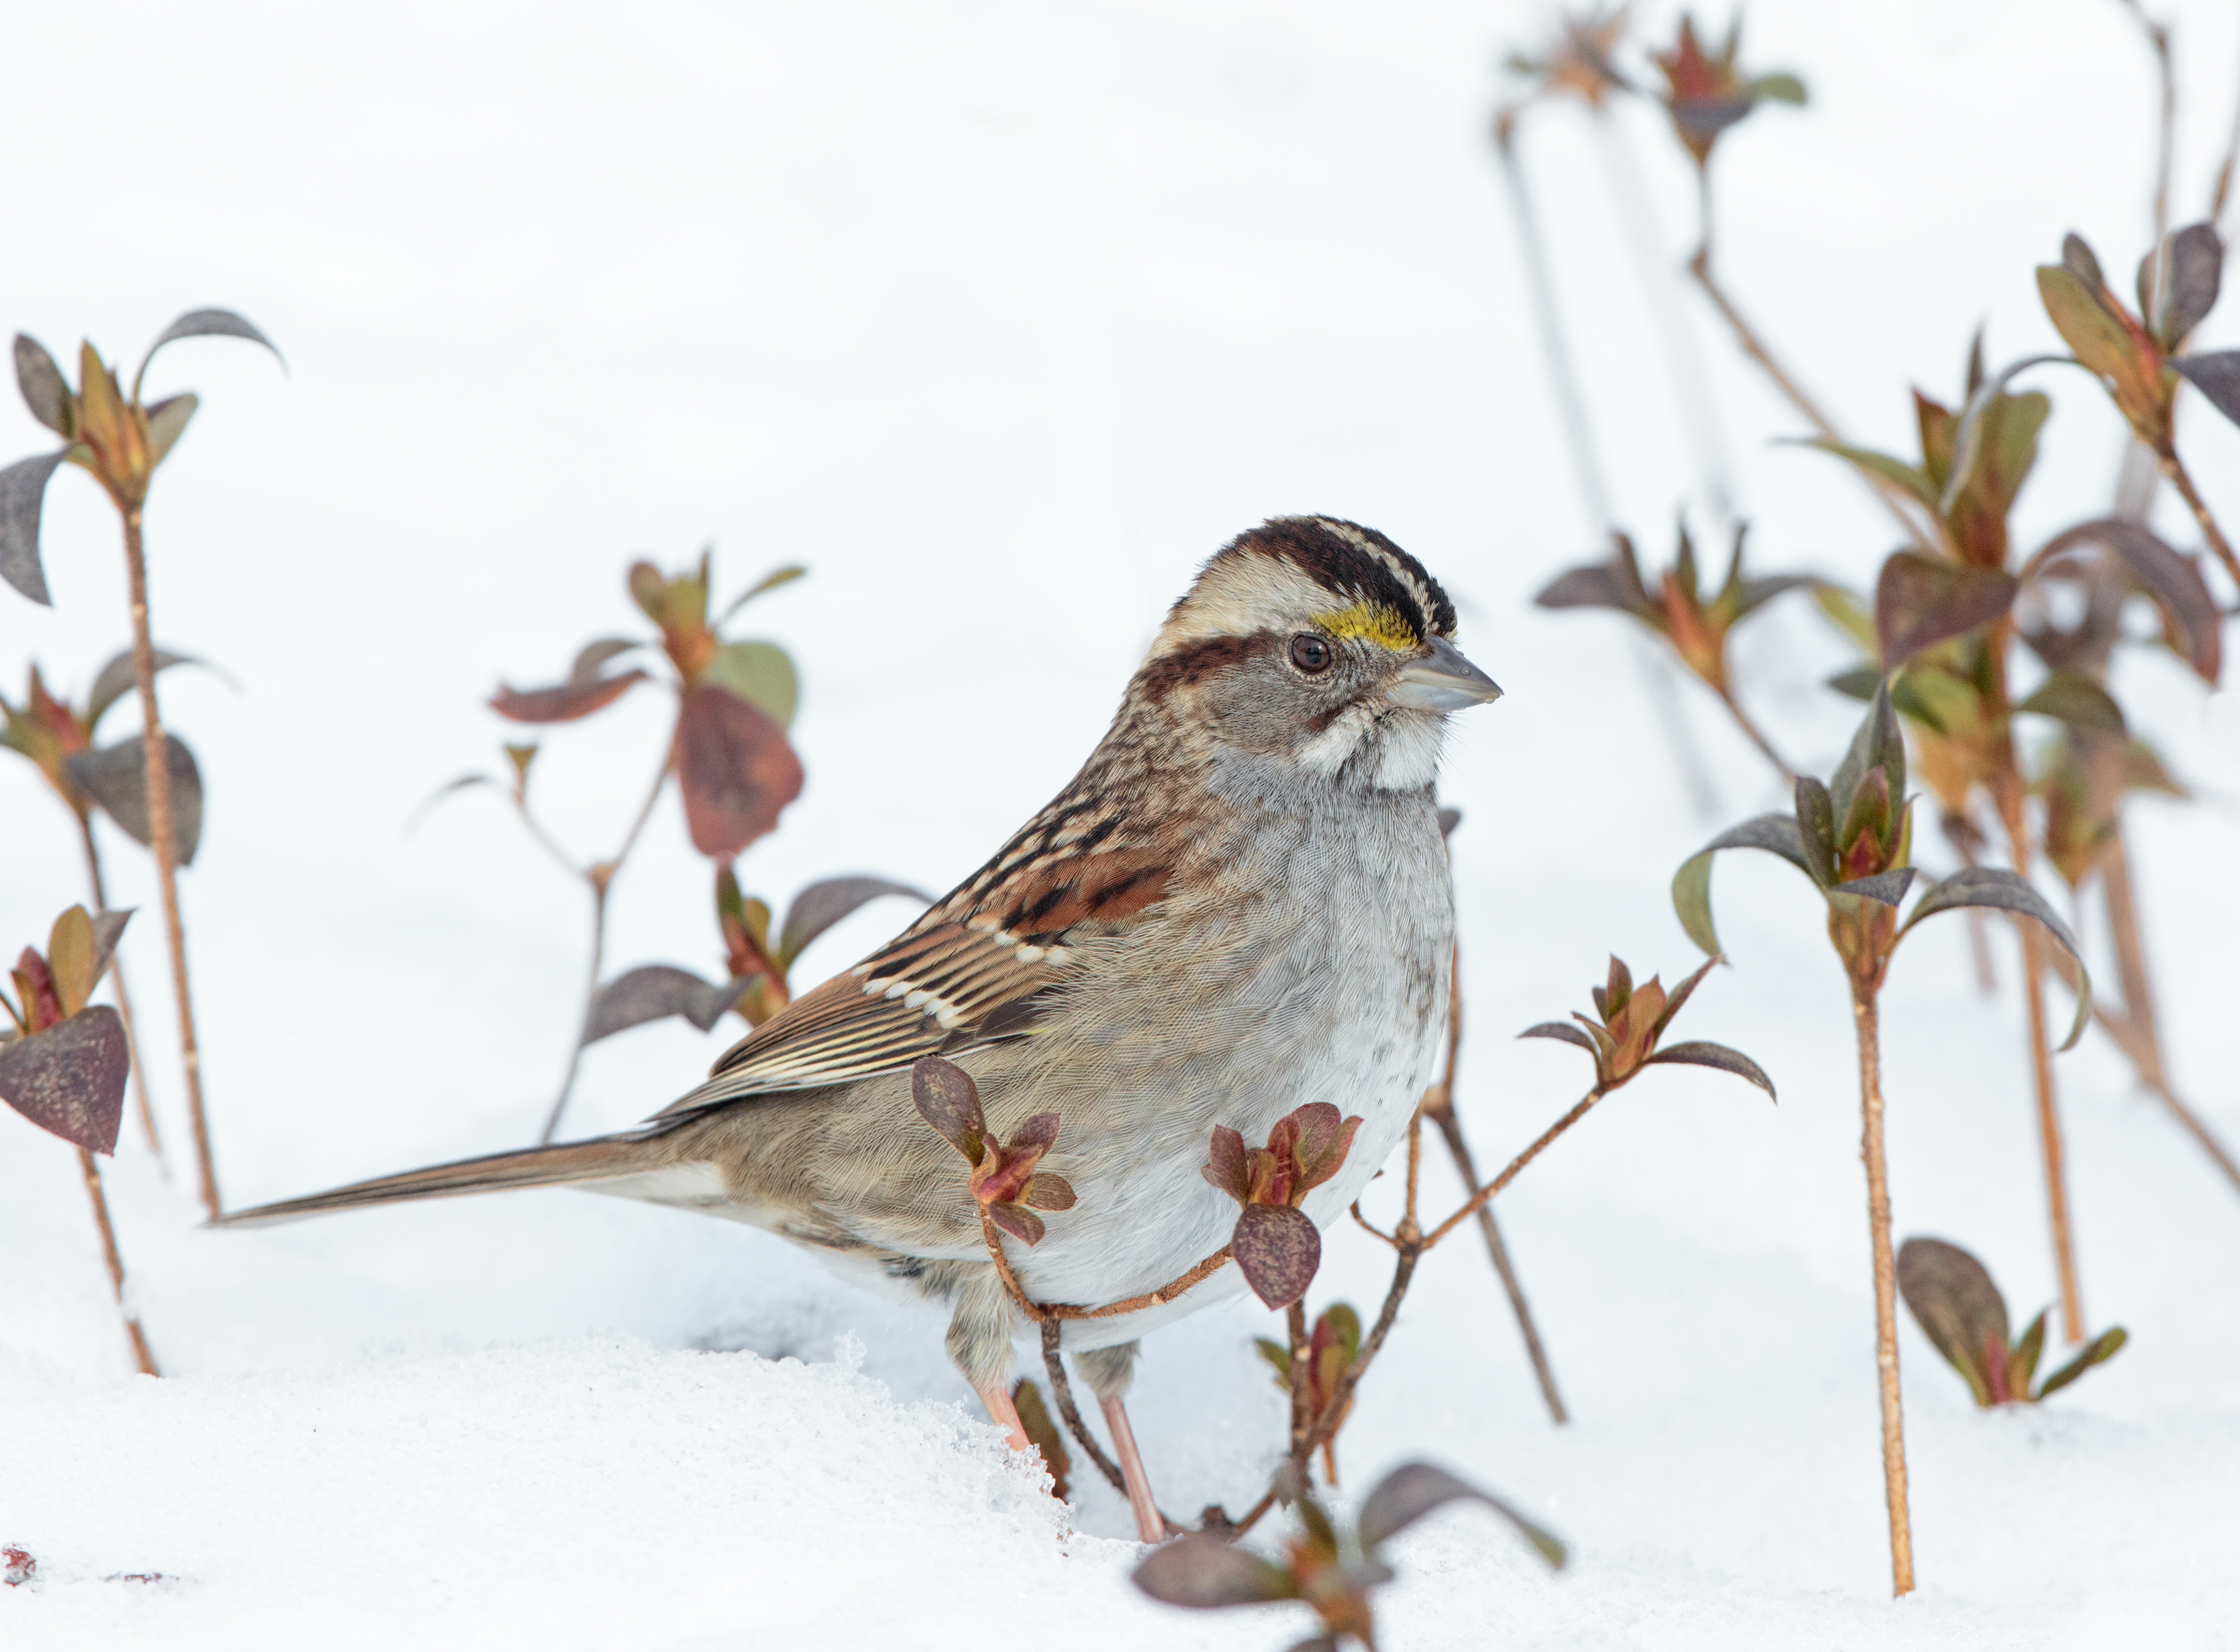 The White-throated Sparrow has been the most frequently found collision victim by Project Safe Flight volunteers since our patrols began in 1997. Photo: <a href=\"https://laurameyers.photoshelter.com/index\" target=\"_blank\">Laura Meyers</a> 